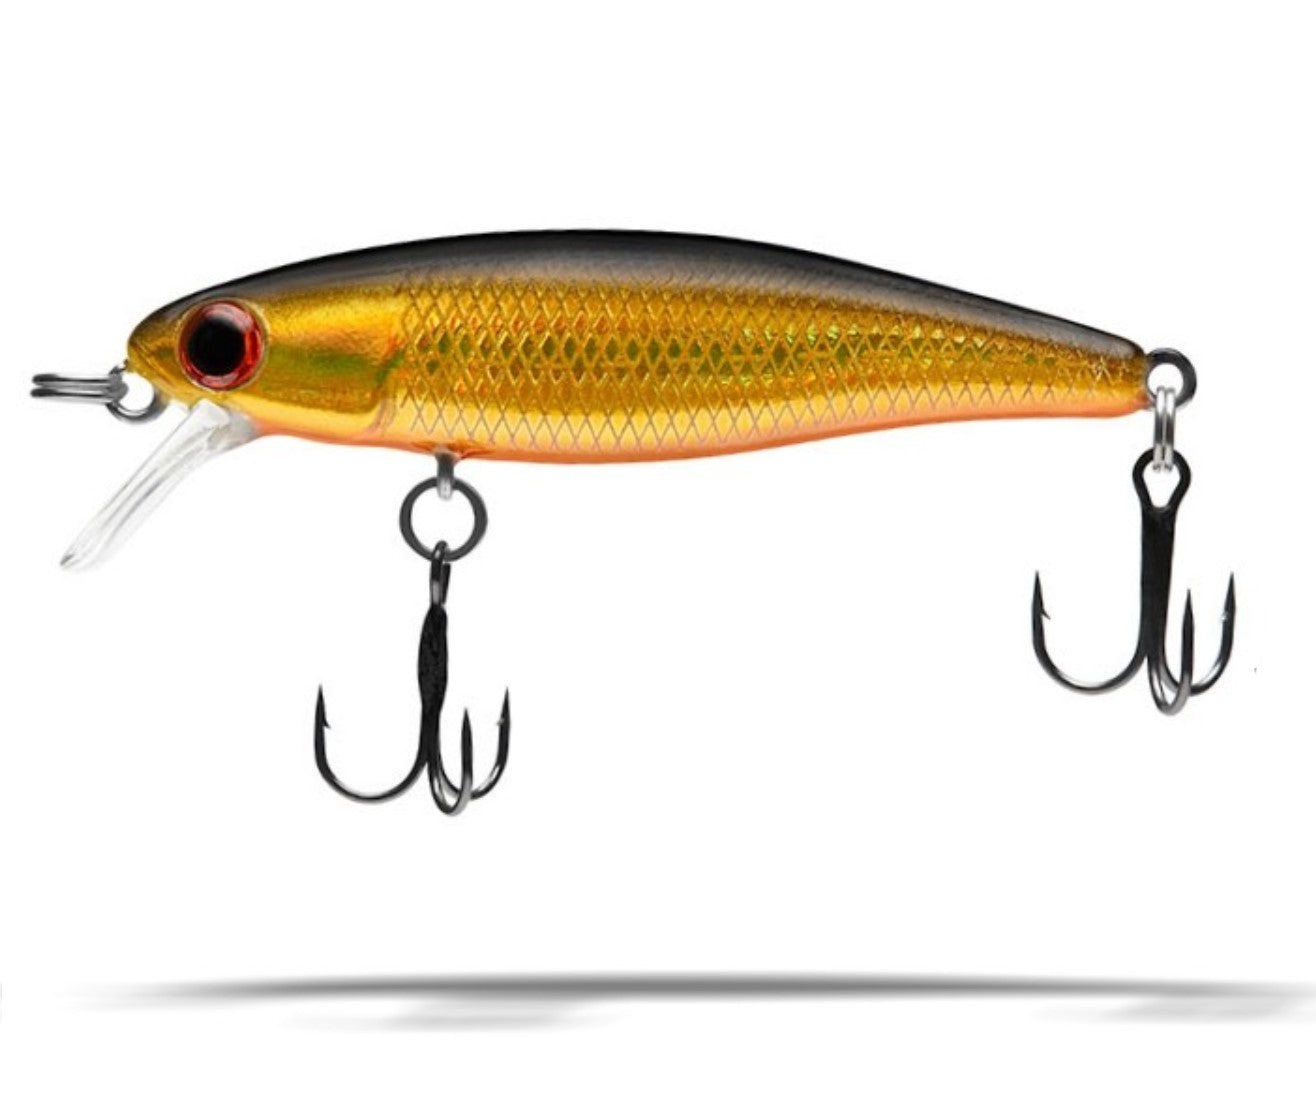 Dynamic Lures HD Trout (Gold Orange) – Trophy Trout Lures and Fly Fishing